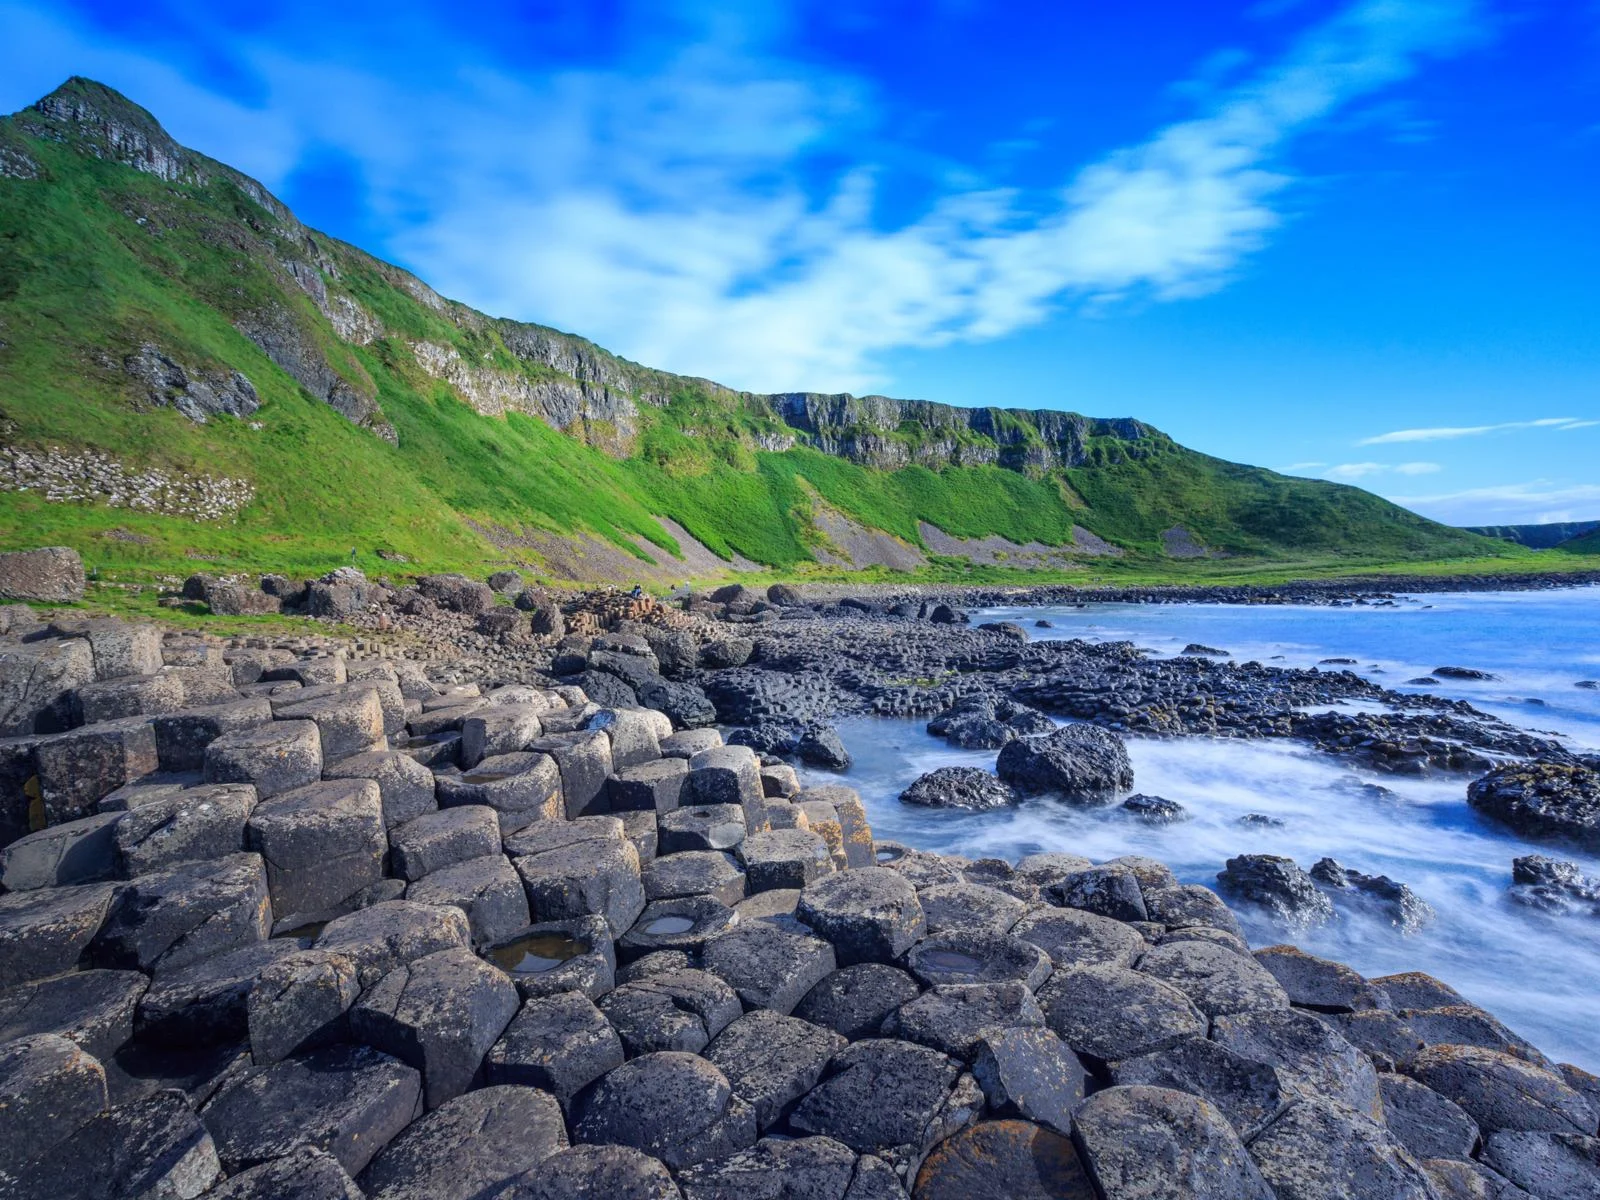 Green patches of grass and rare natural hexagonal rocks at Giant's Causeway Coast, a UNESCO Heritage Site and one of the best places to visit in Ireland